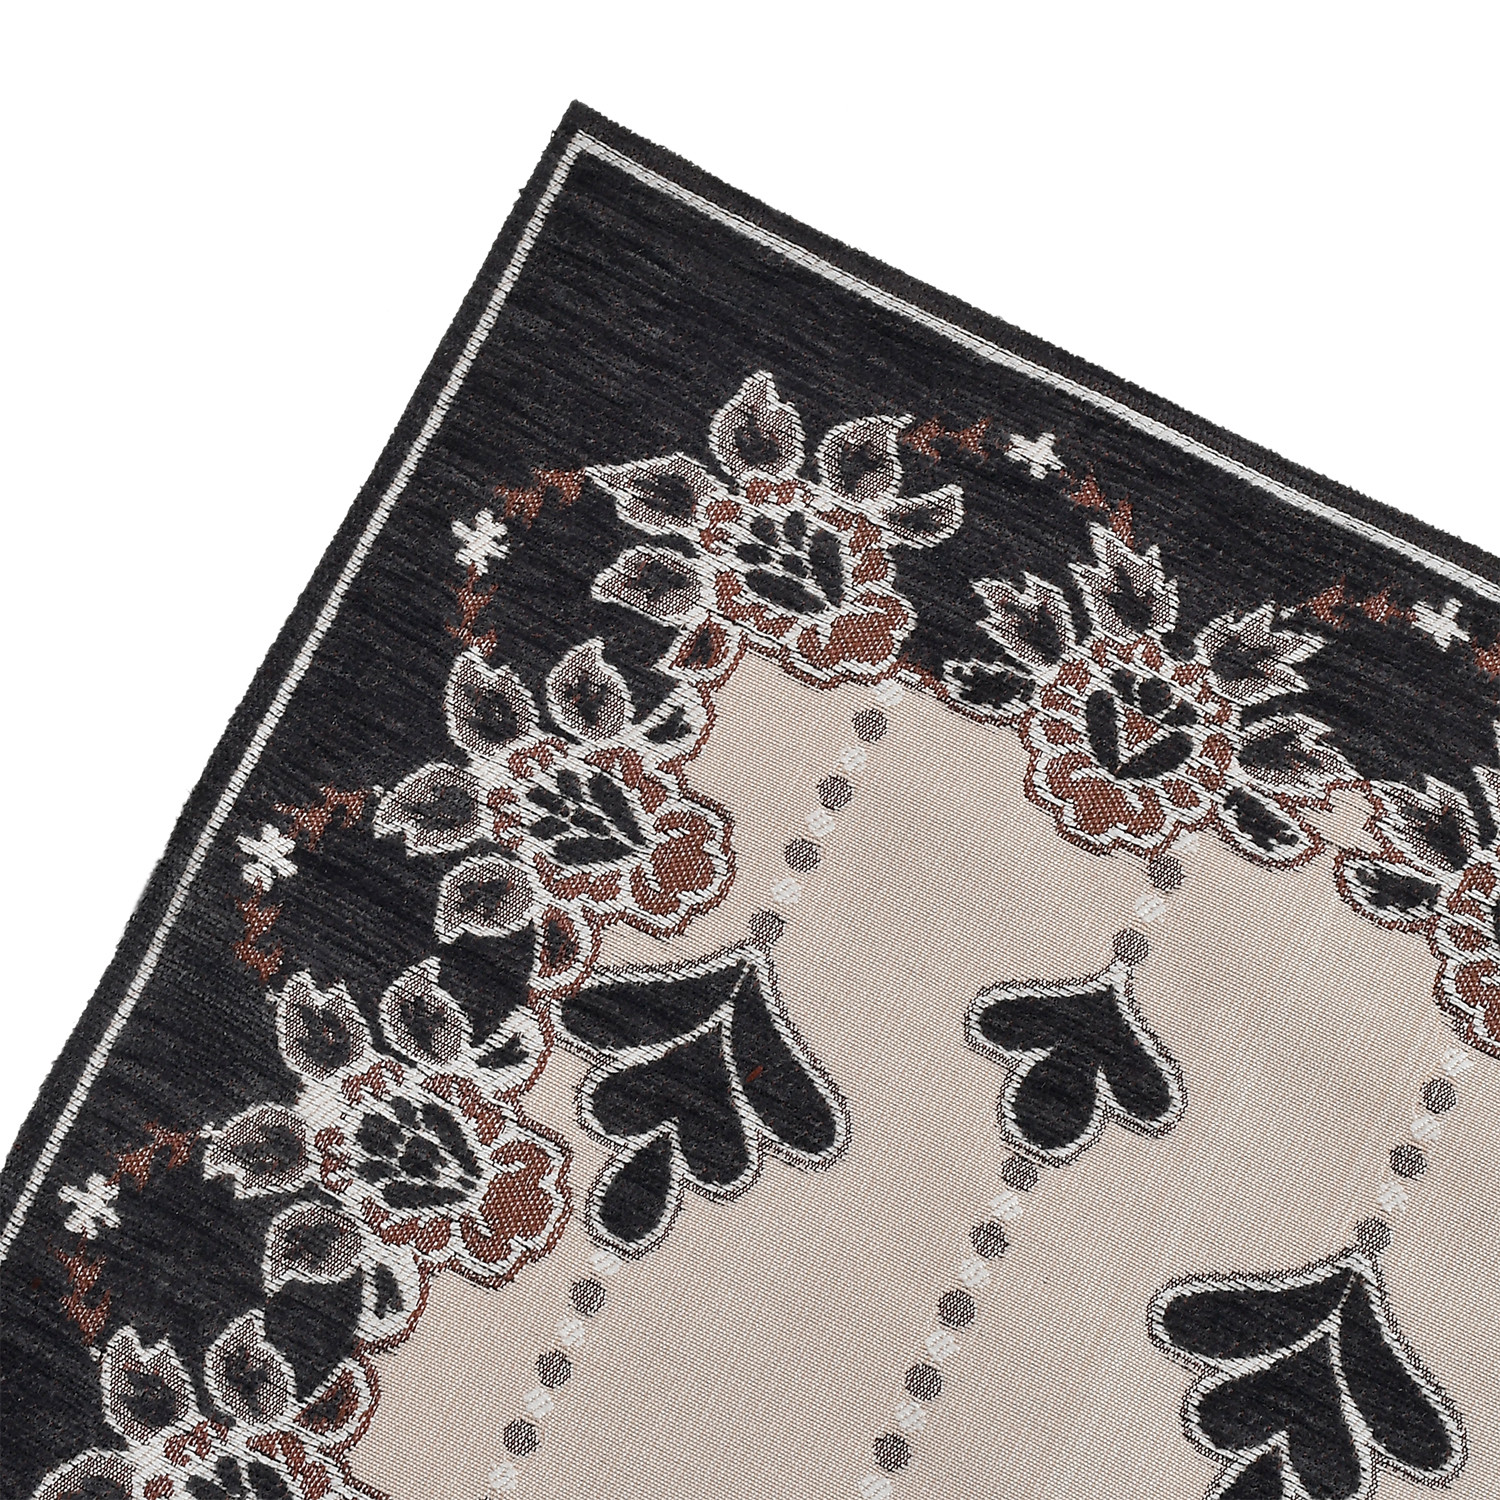 Kuber Industries Multiuses Floral Print Rectangular Cotton Table Runner for Dining and Center Table (Black)